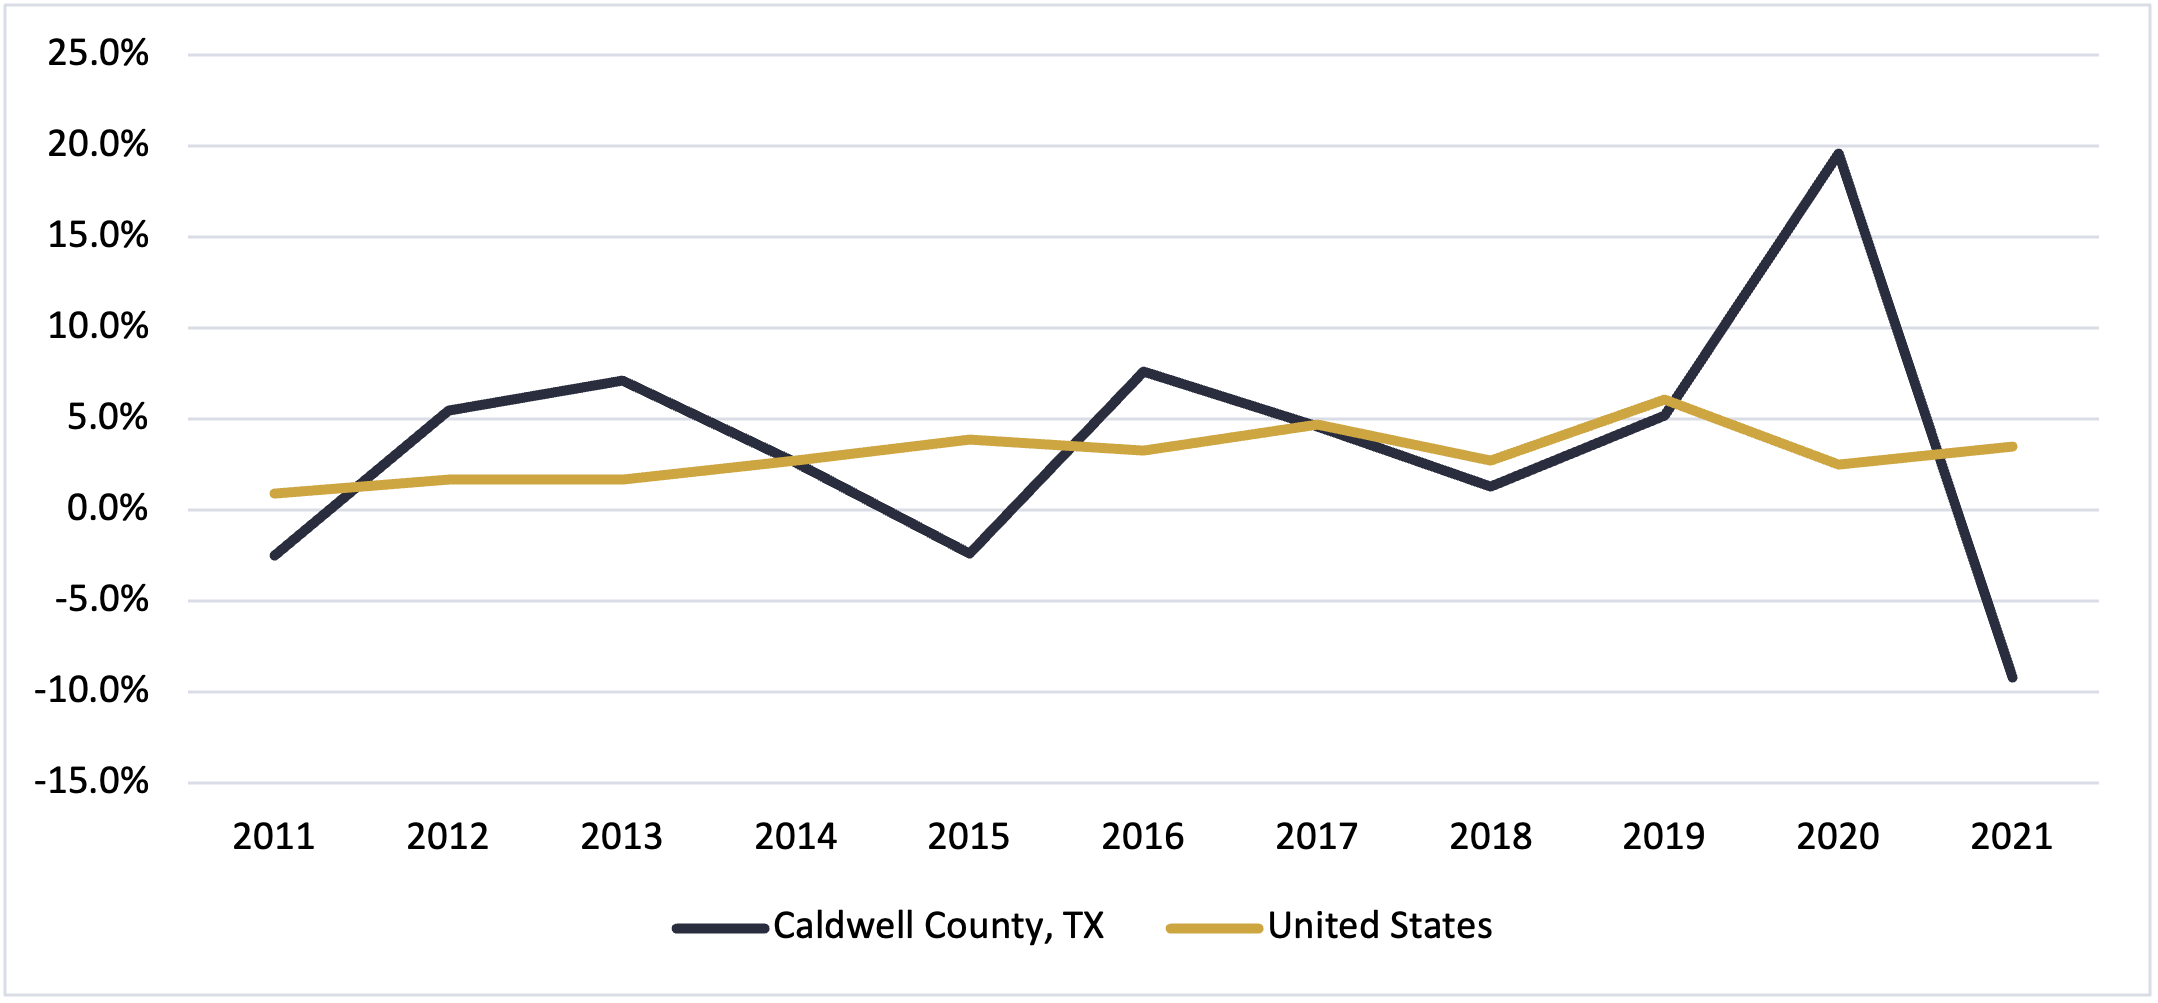 Caldwell County Texas Median Household Income 2021